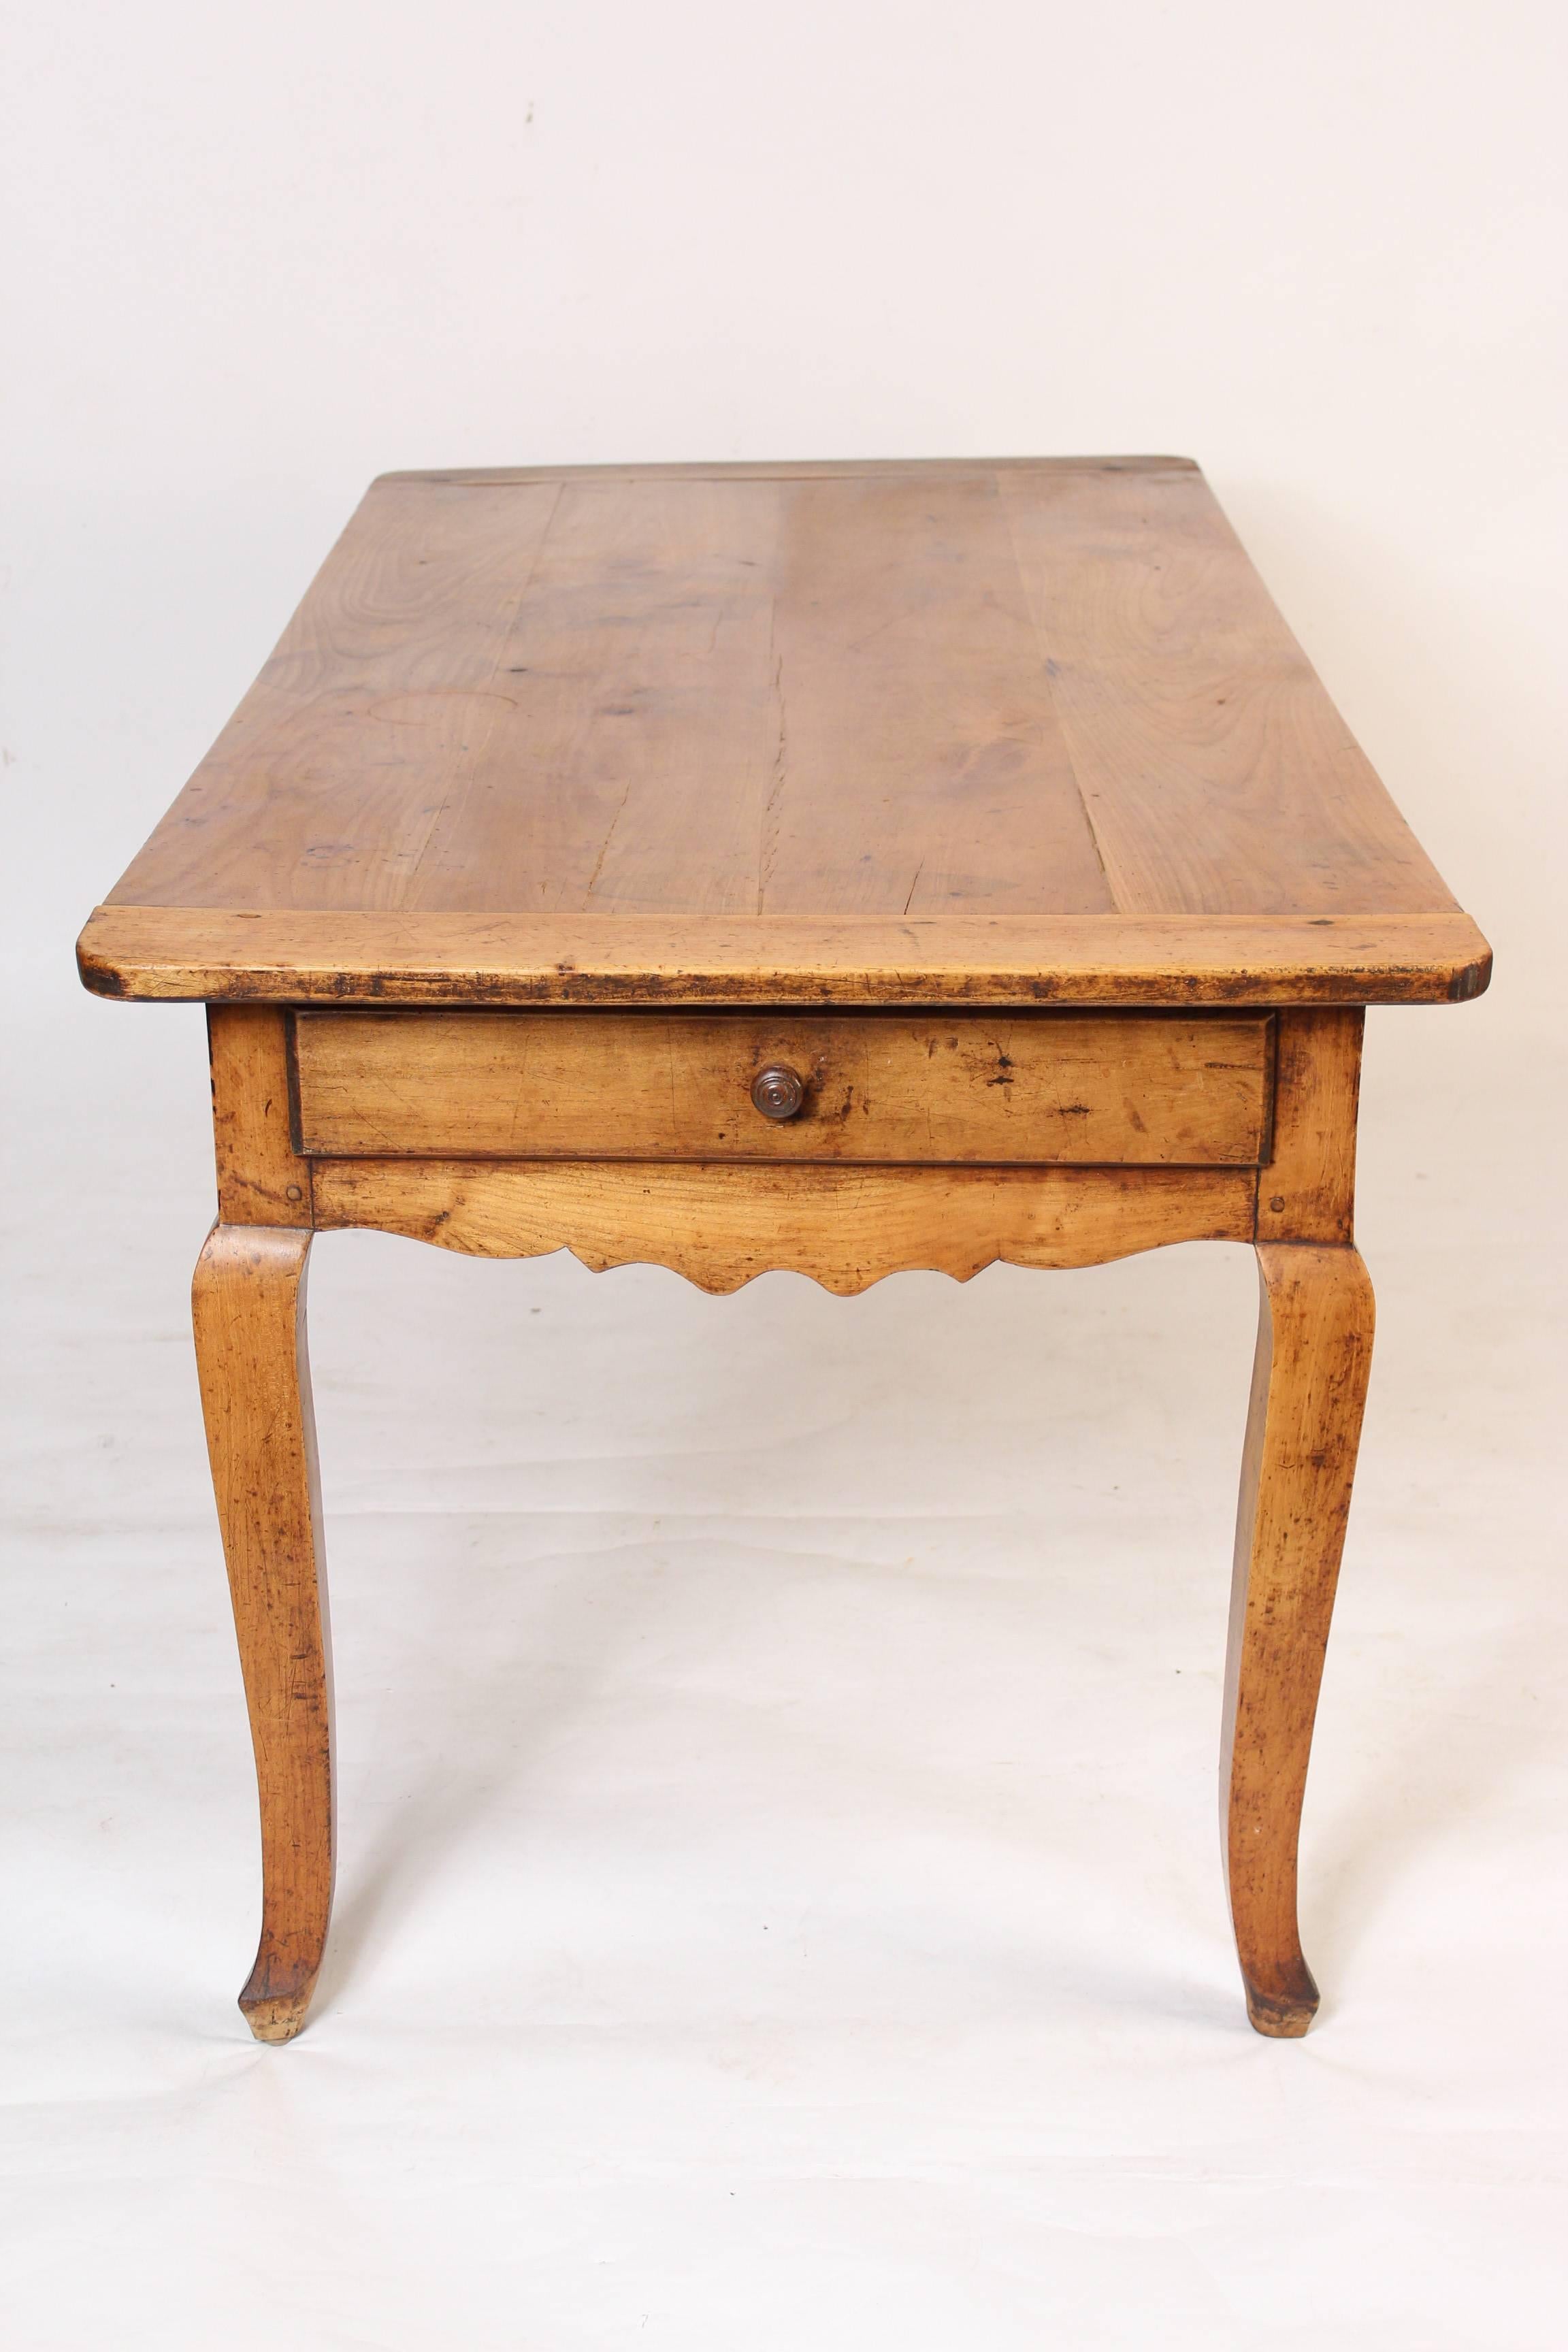 Louis XV Provincial style fruitwood farm table, early 19th century. Knee clearance on sides 22